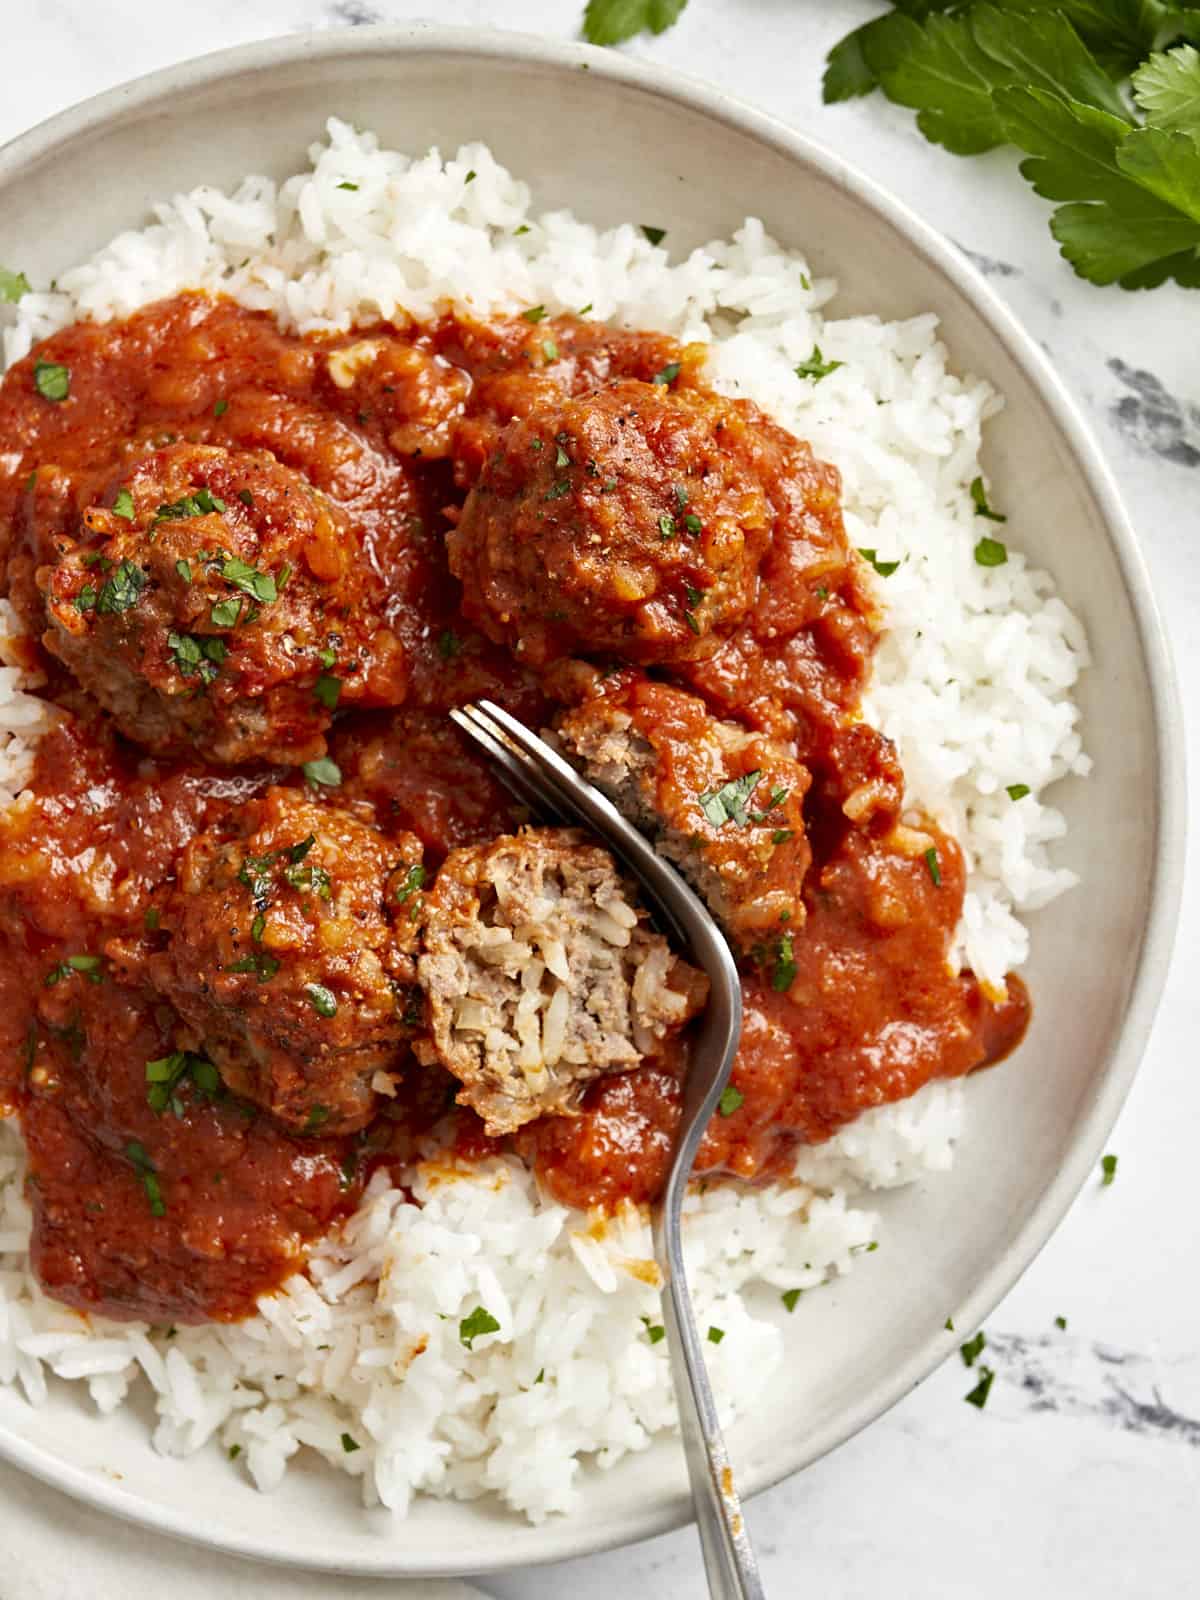 Top view of porcupine meatballs on a serving plate with white rice and a fork cutting a meatball in half.